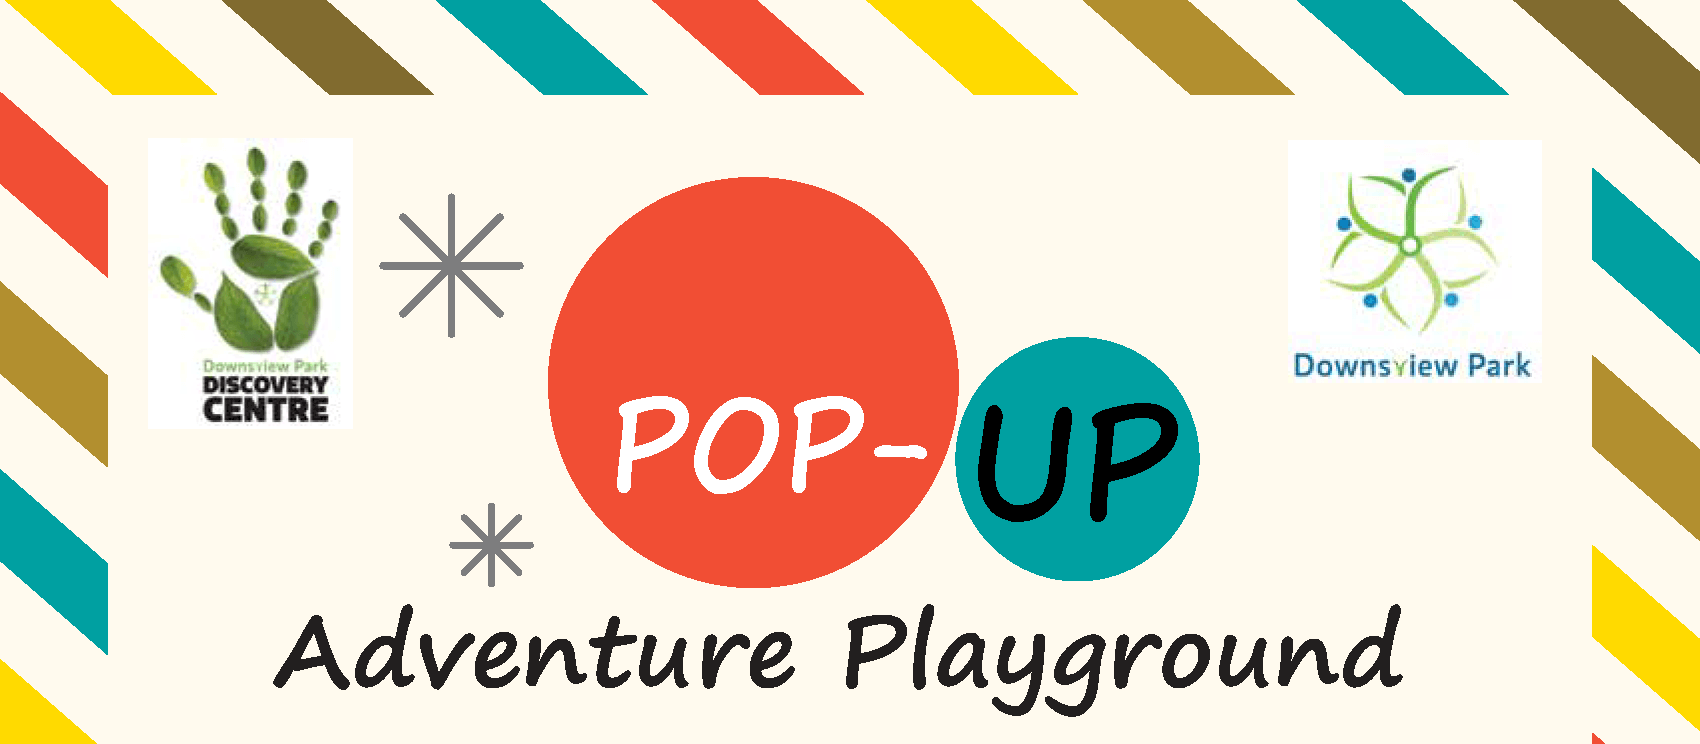 The pop-up playground poster.